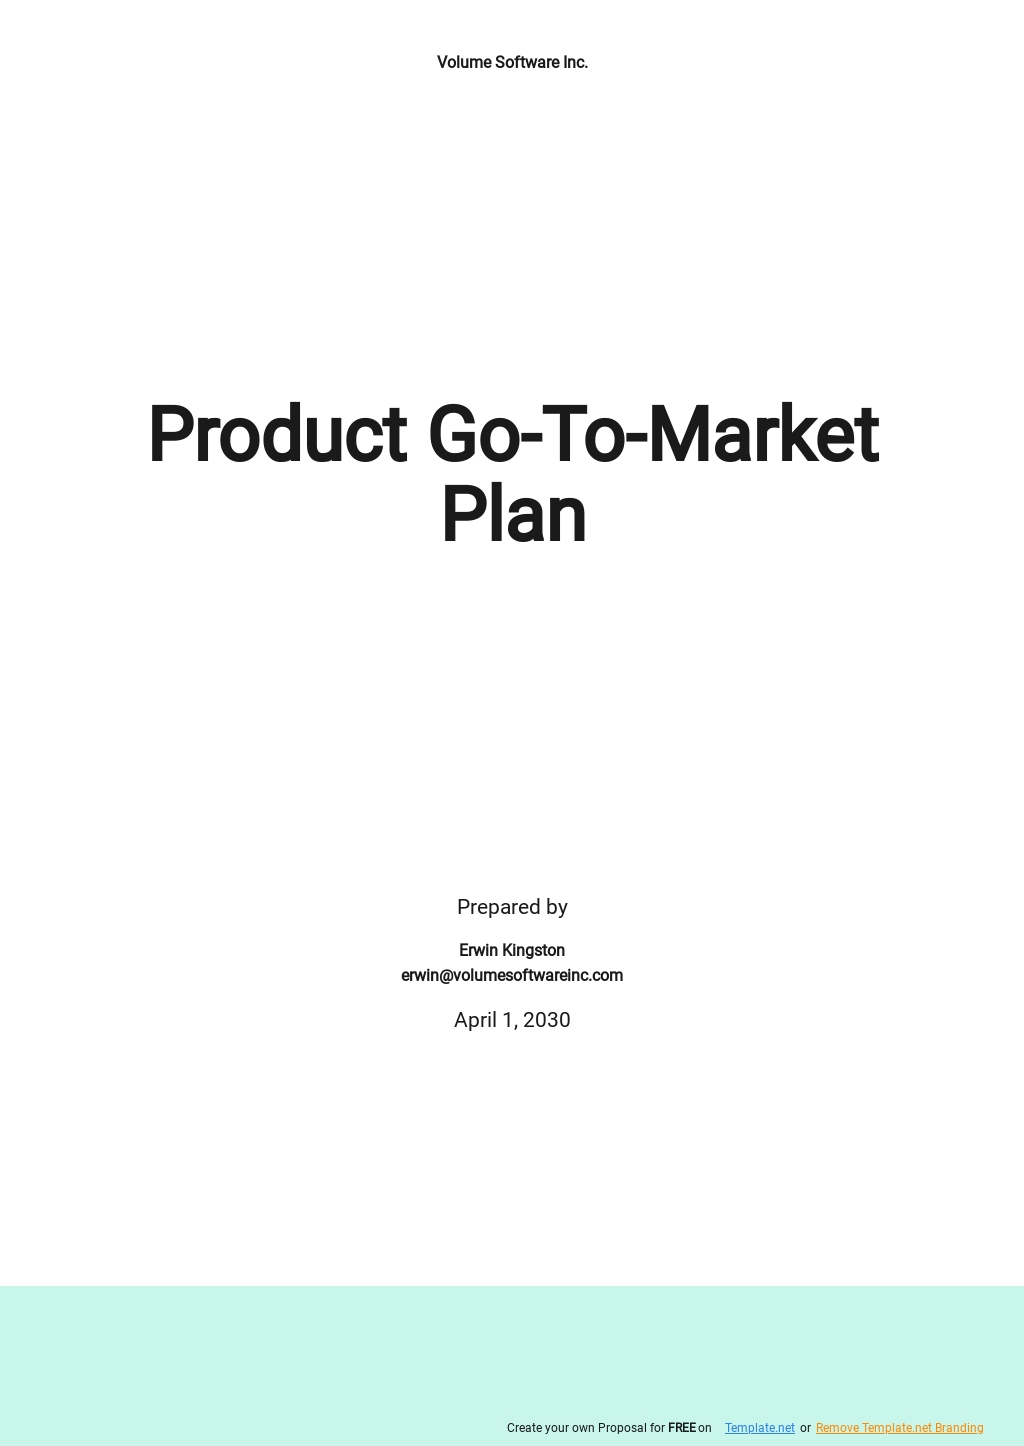 Product Go-to-Market Plan Template